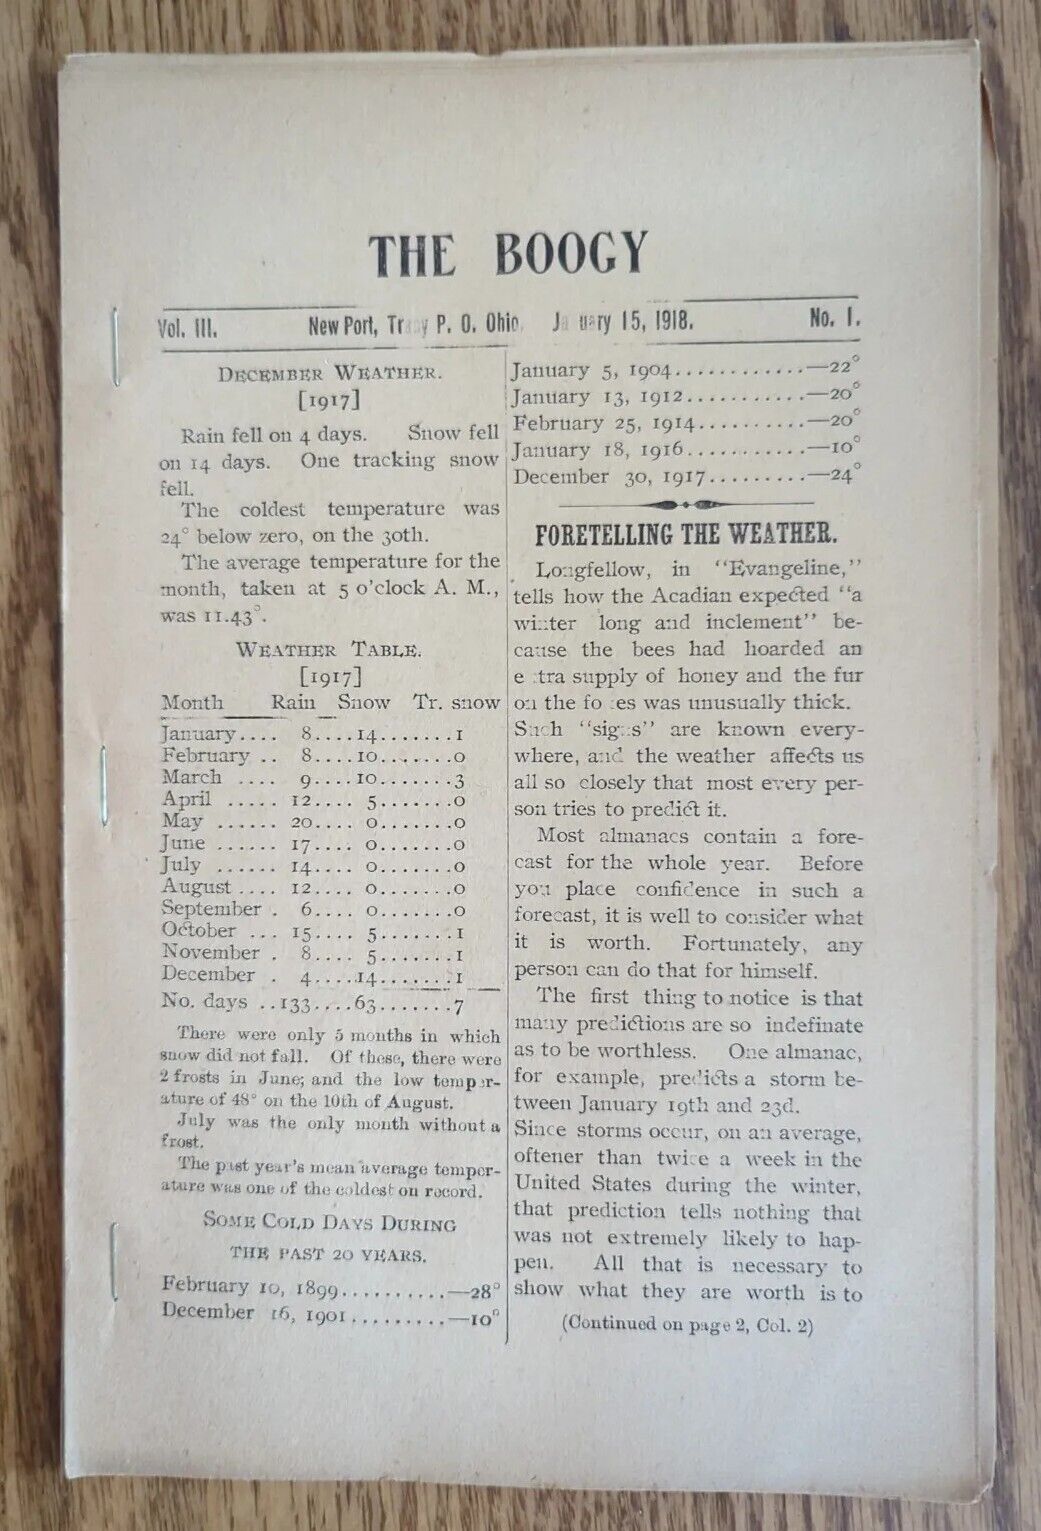 THE BOOGY R. W. Hinds New Port Tracy P O Ohio Full Year 1918 Tuscarawas Volume 3